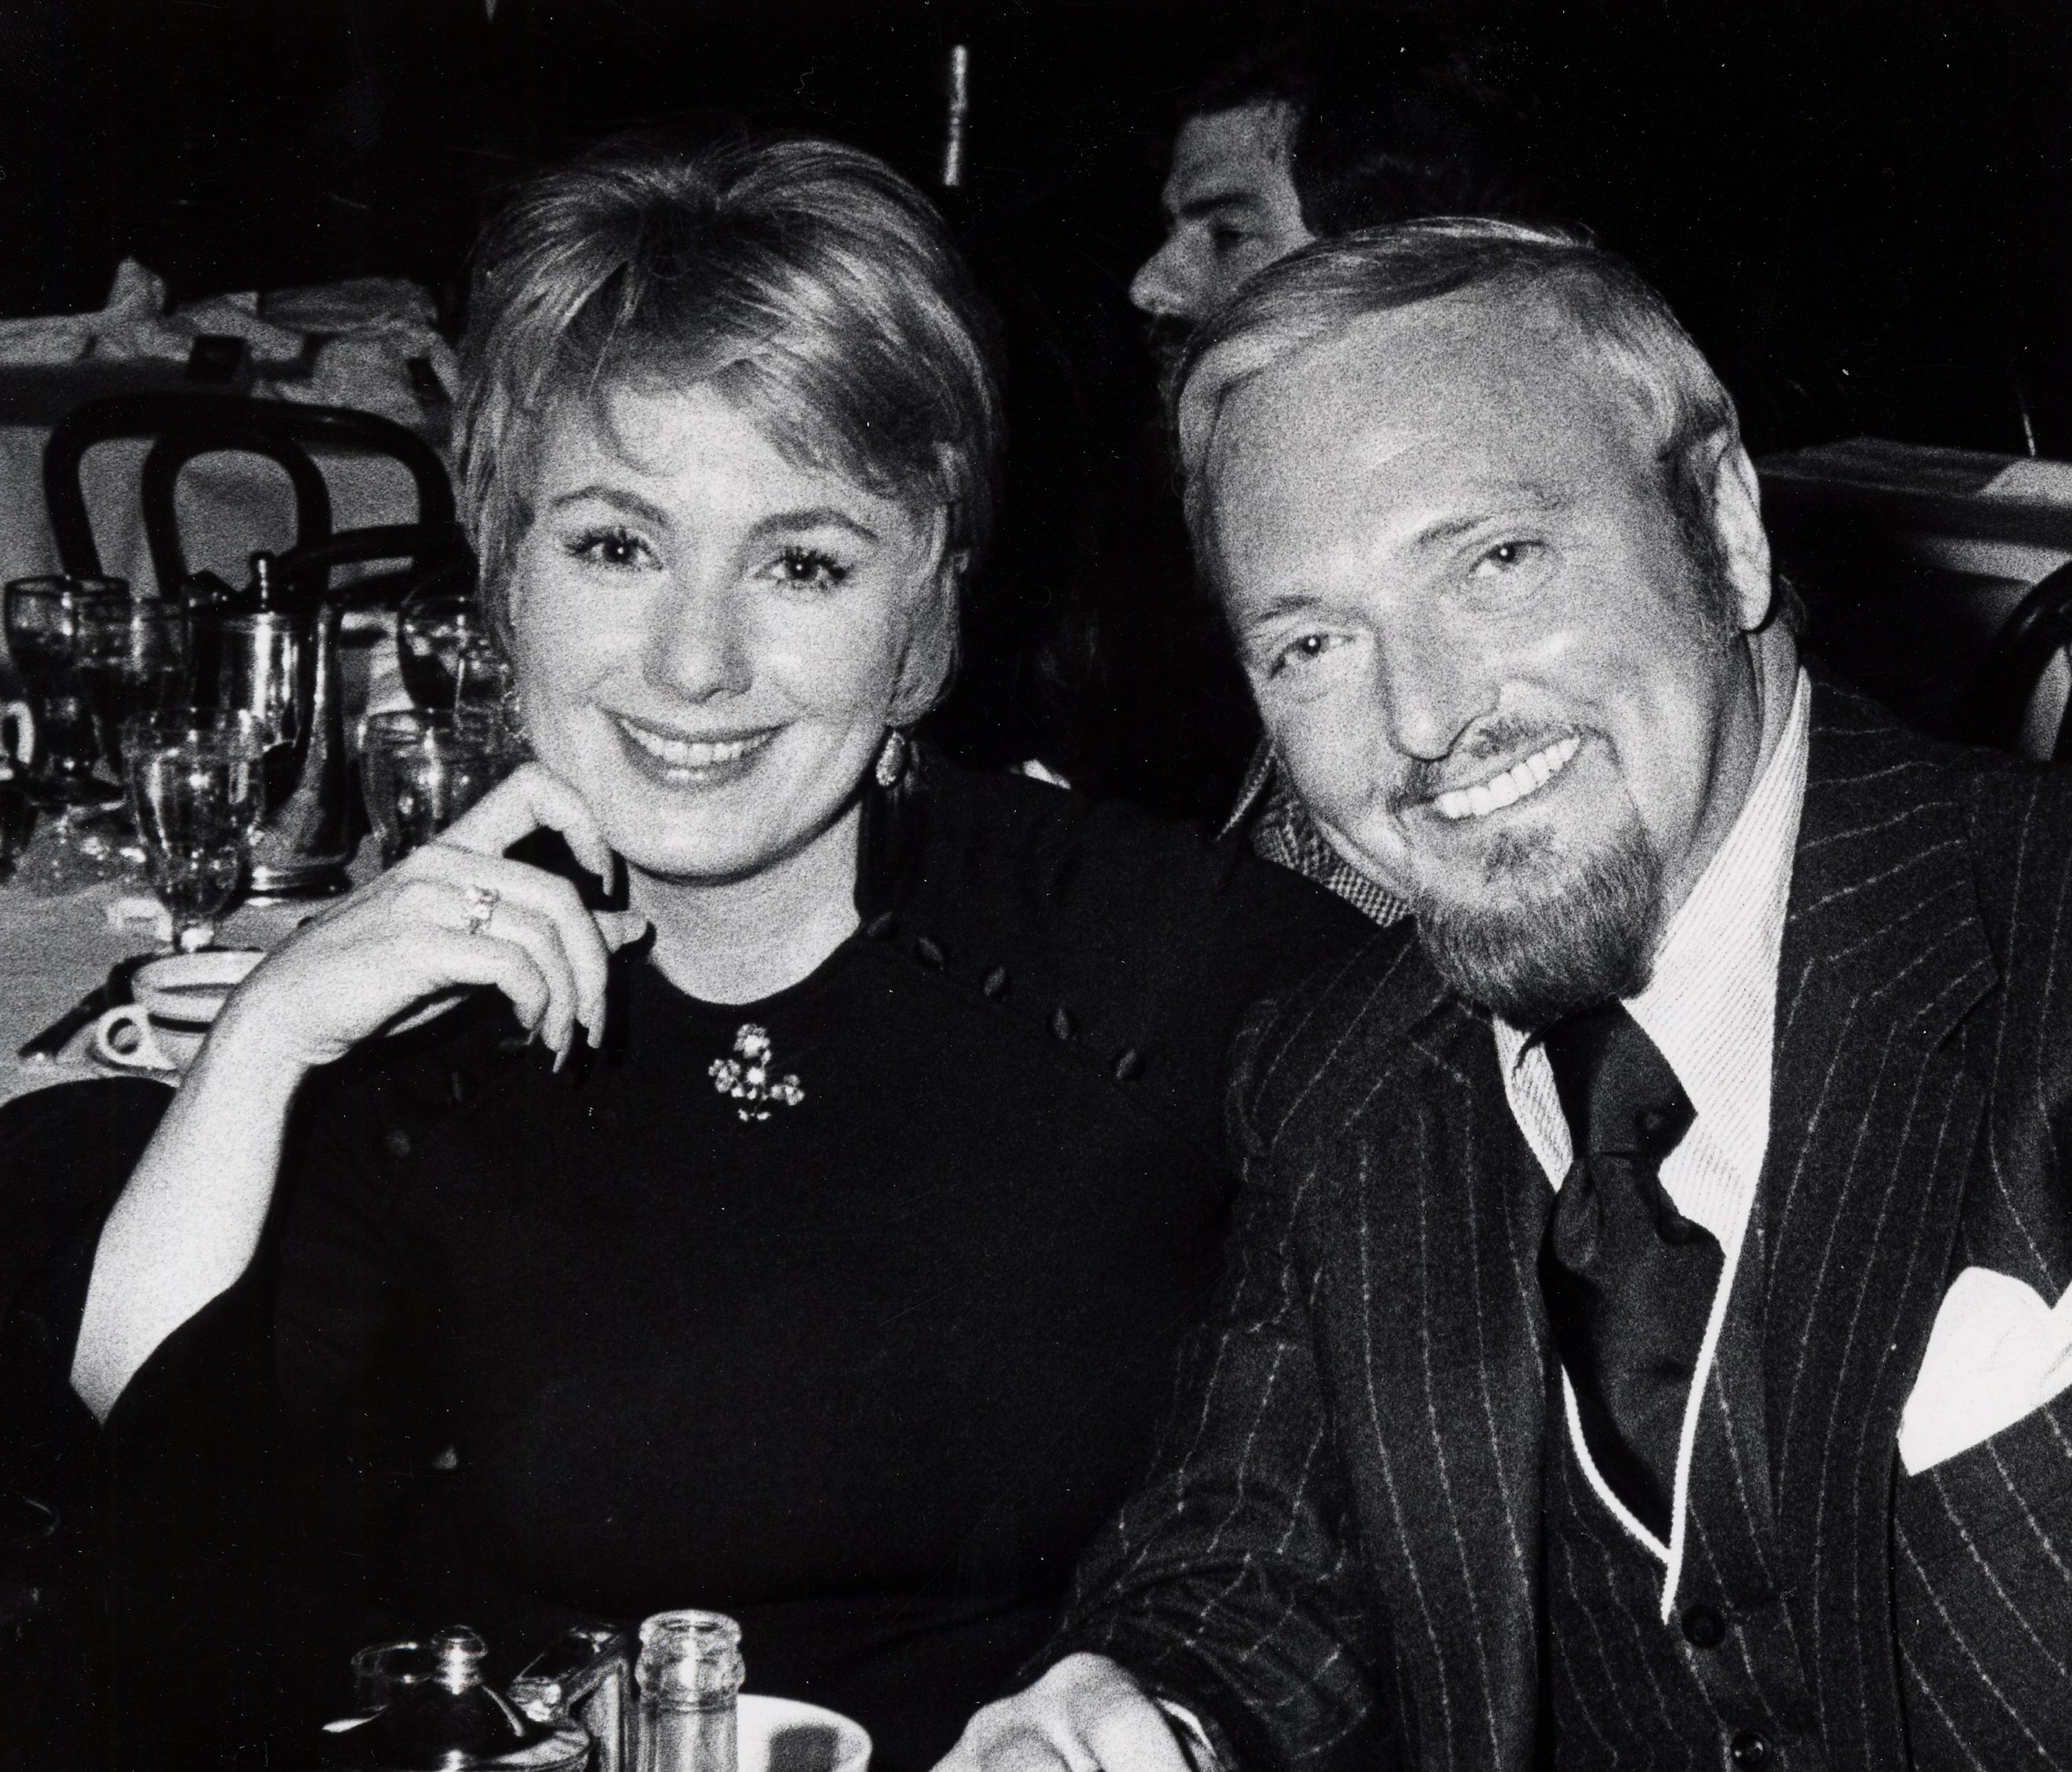 Shirley Jones and Jack Cassidy at Sardi's Restaurant in New York City, on March 10, 1973. | Source: Ron Galella/Ron Galella Collection/Getty Images